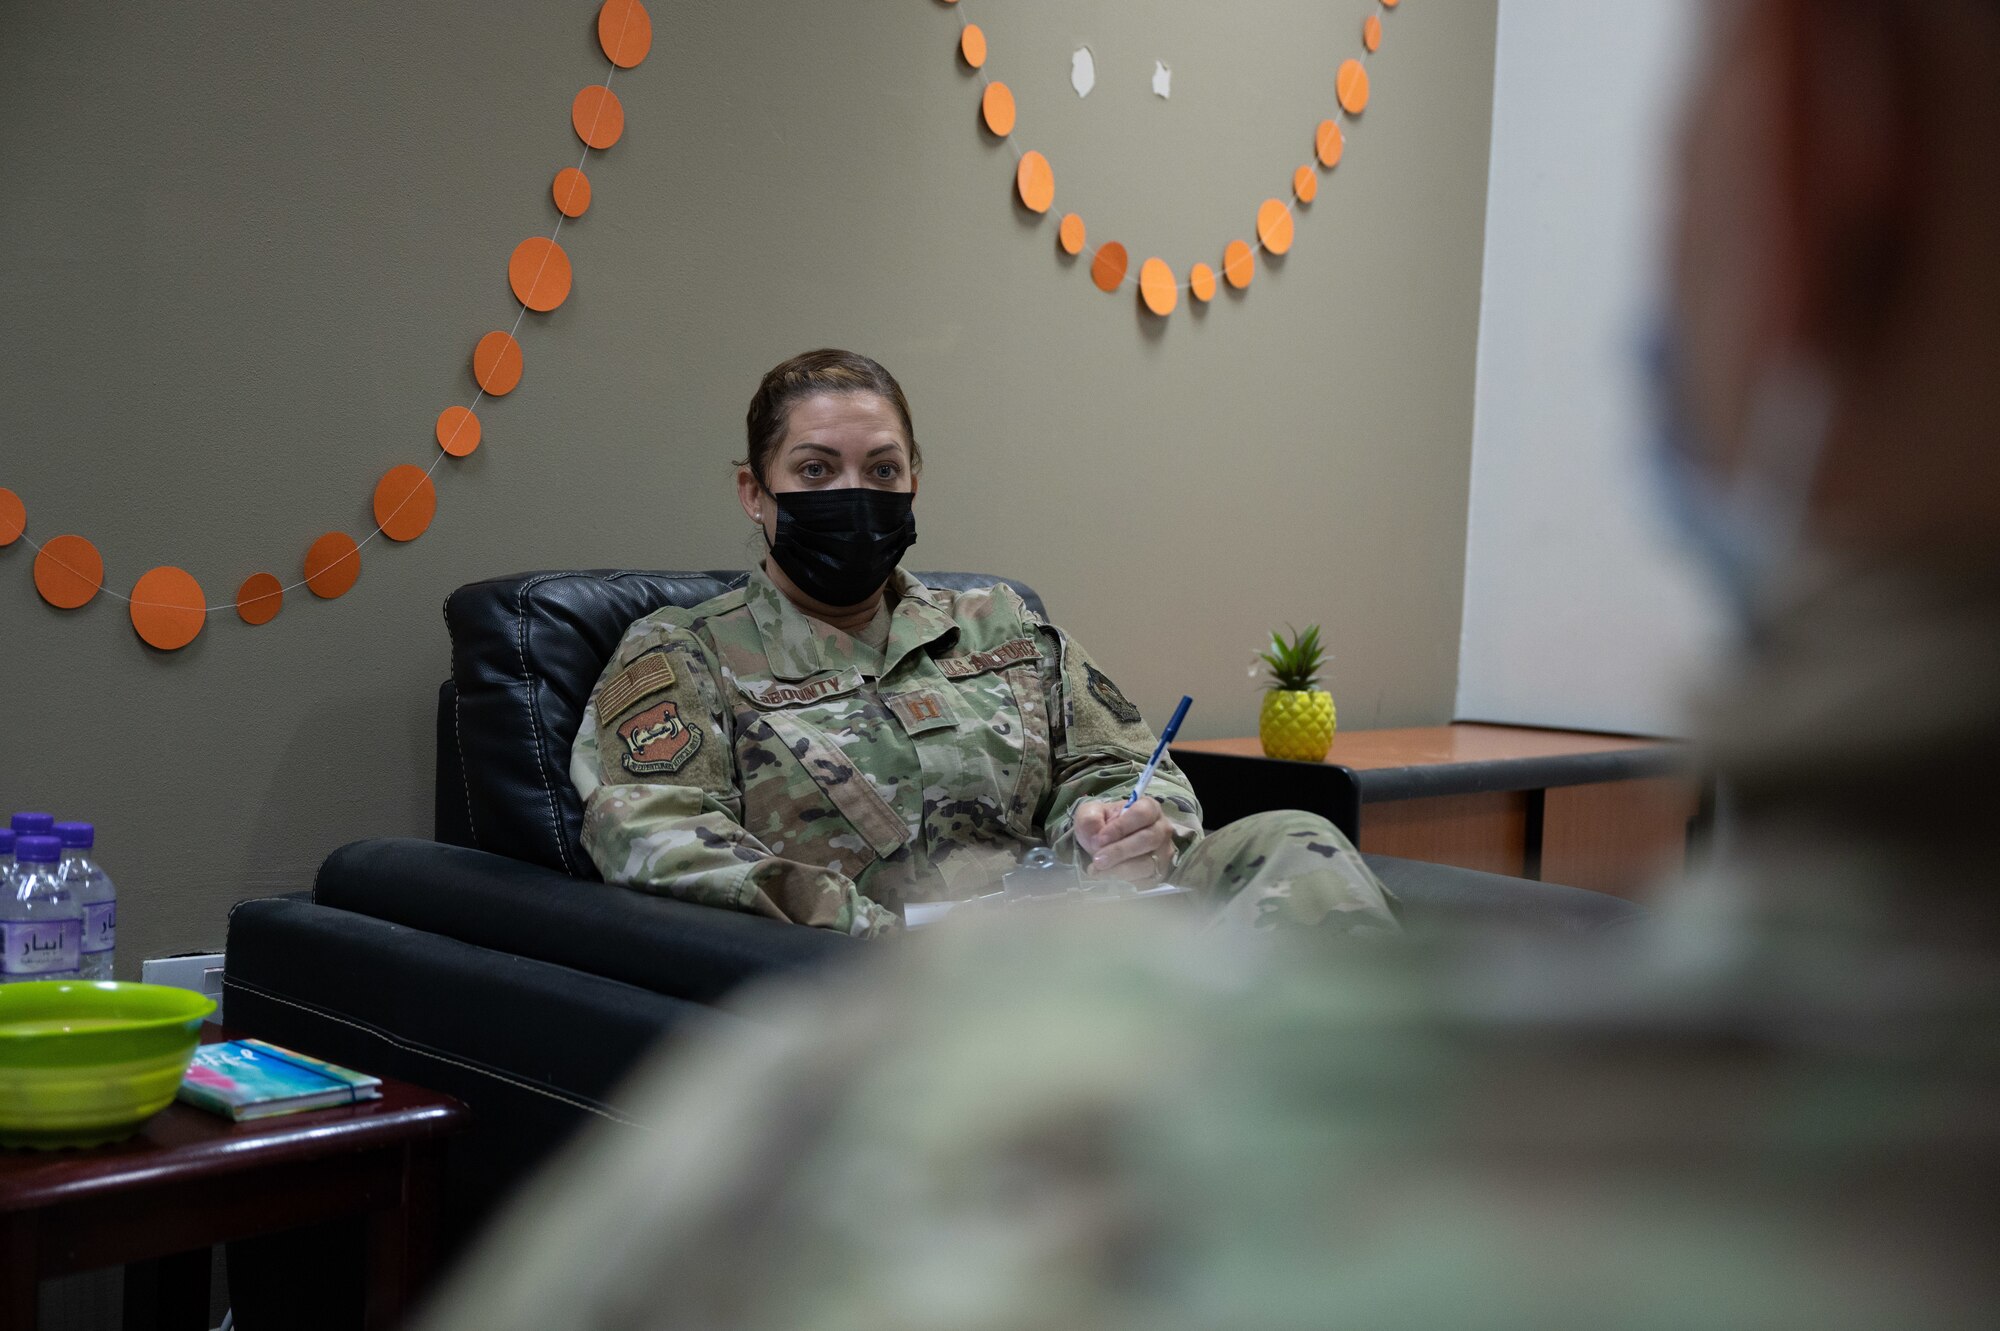 To remain healthy and fit to fight, the 386th Expeditionary Medical Group offers a variety of mental health services, including assessments, therapy and counseling for service members on base.  The four-member mental health team consists of a clinical psychologist, a licensed clinical social worker, and two technicians—double the number of members from the last rotation.